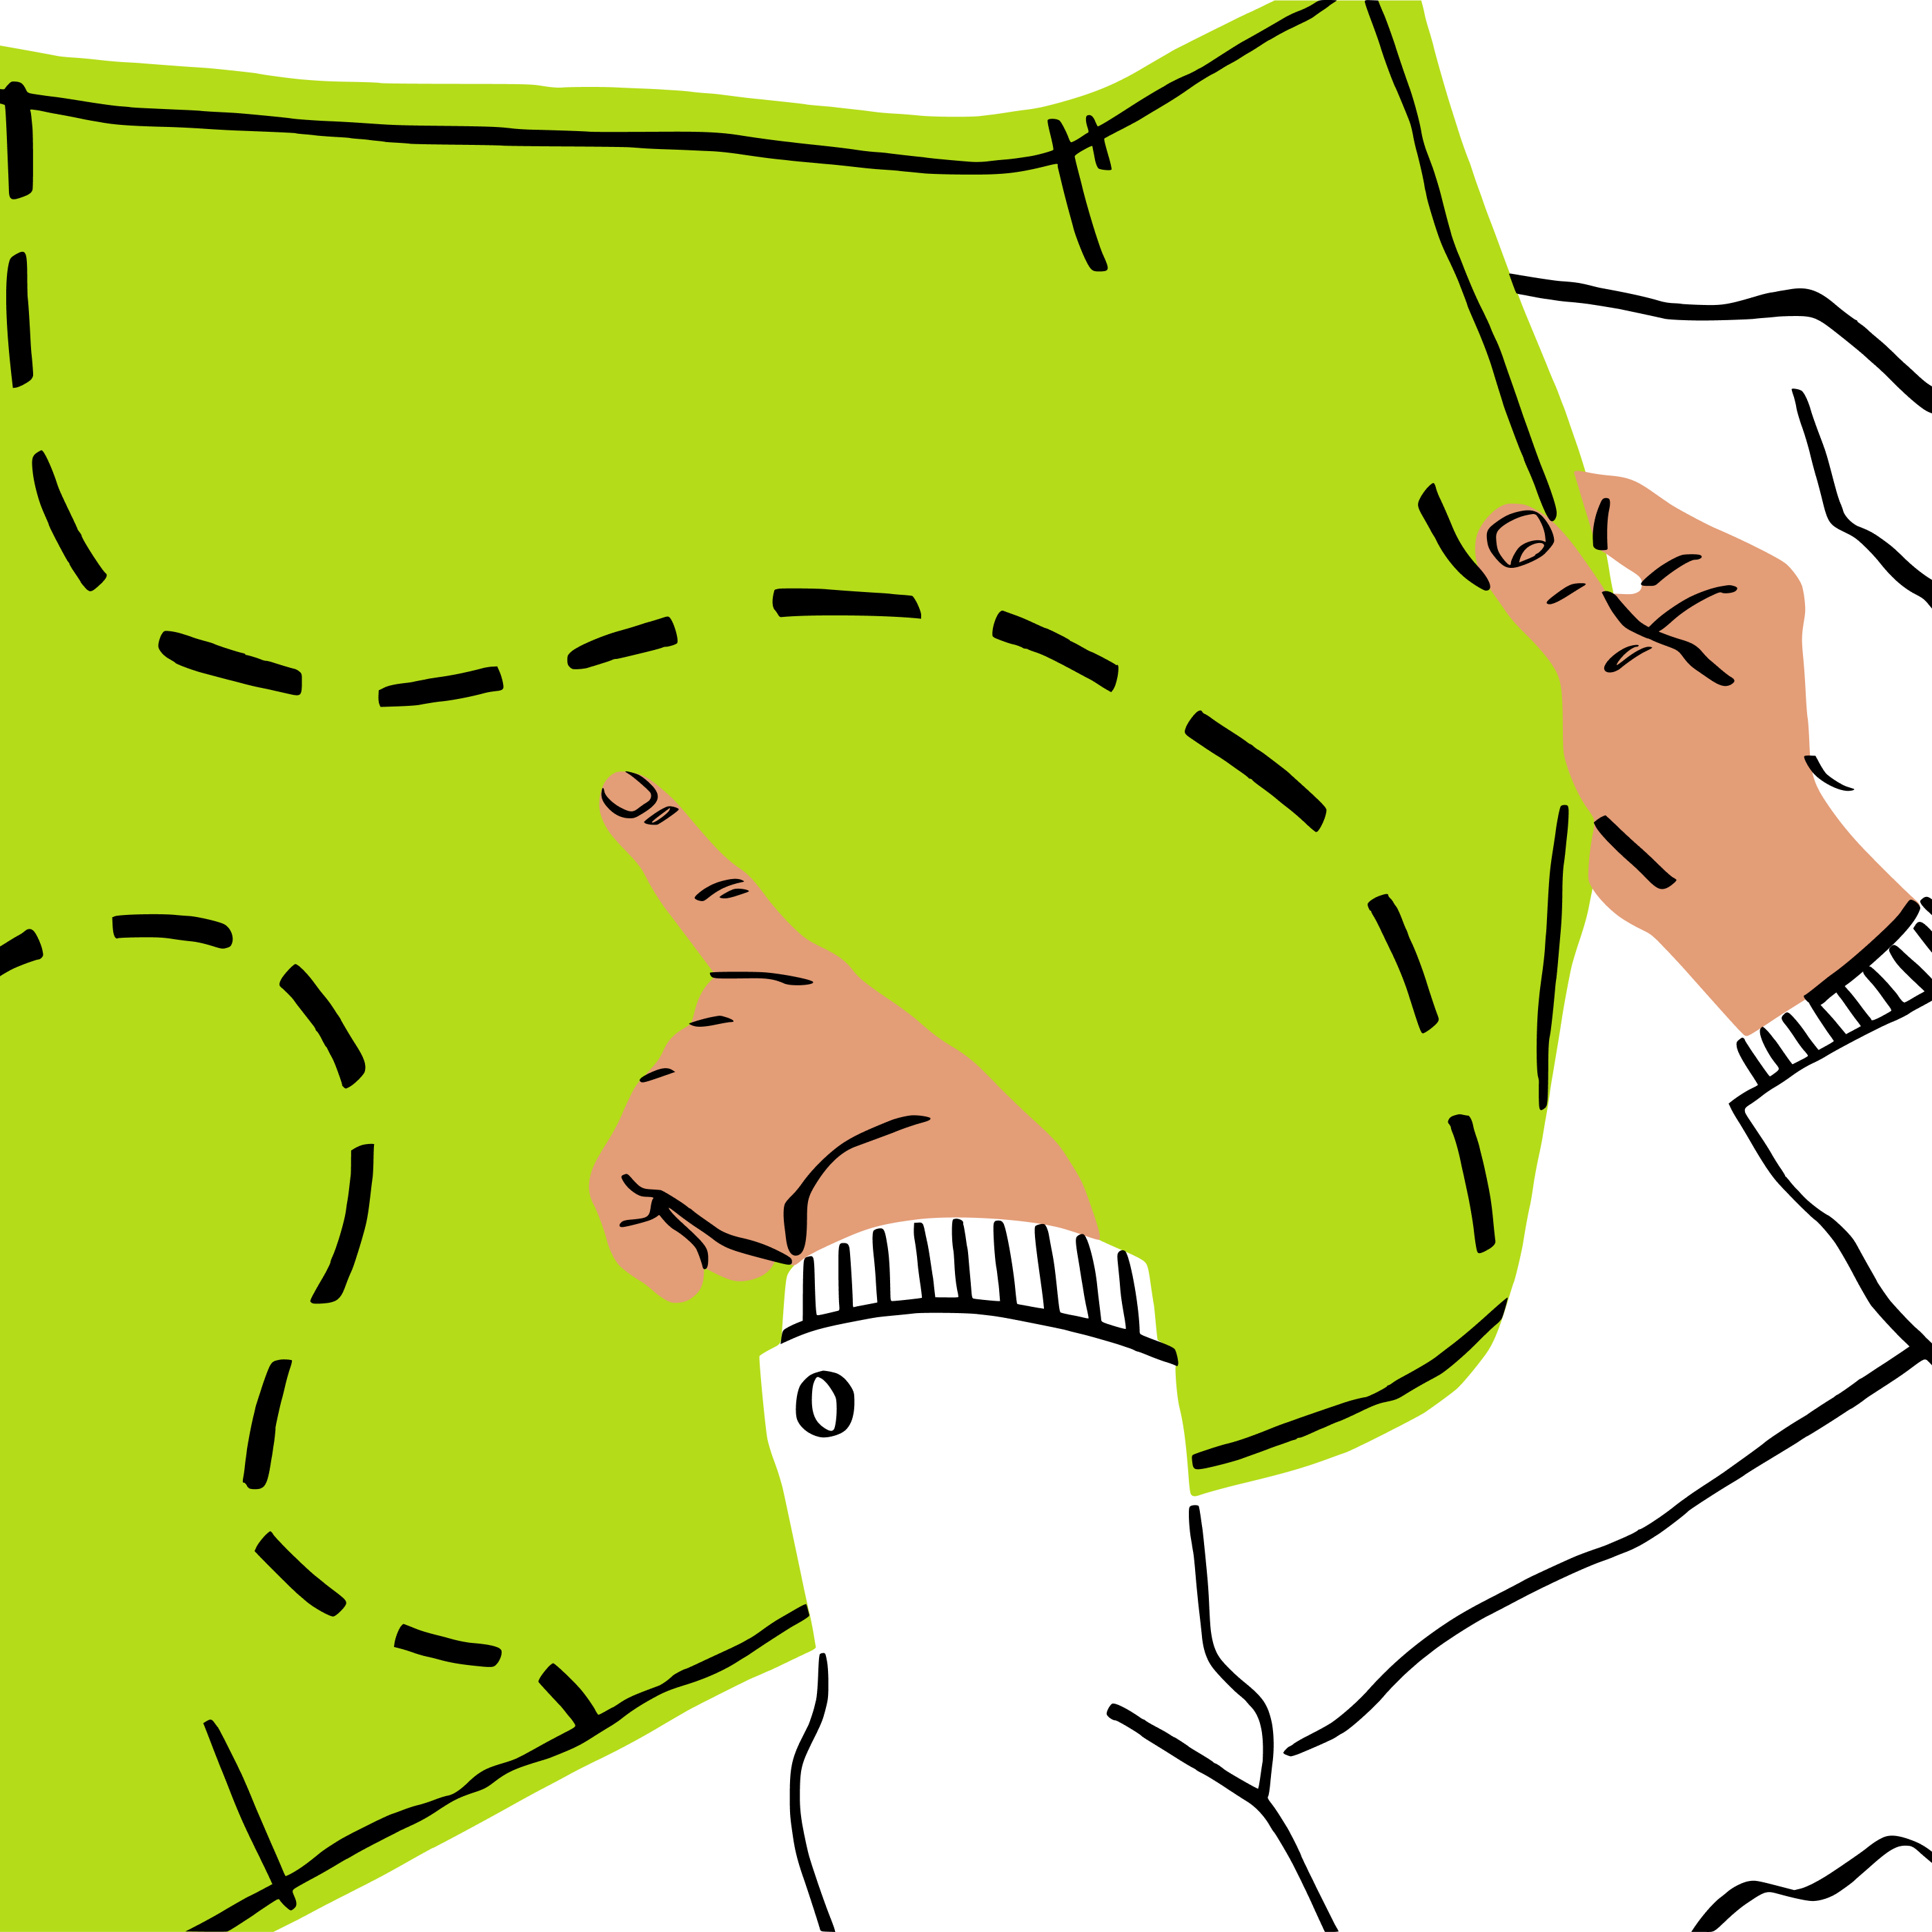 Illustration of a person looking at a map.